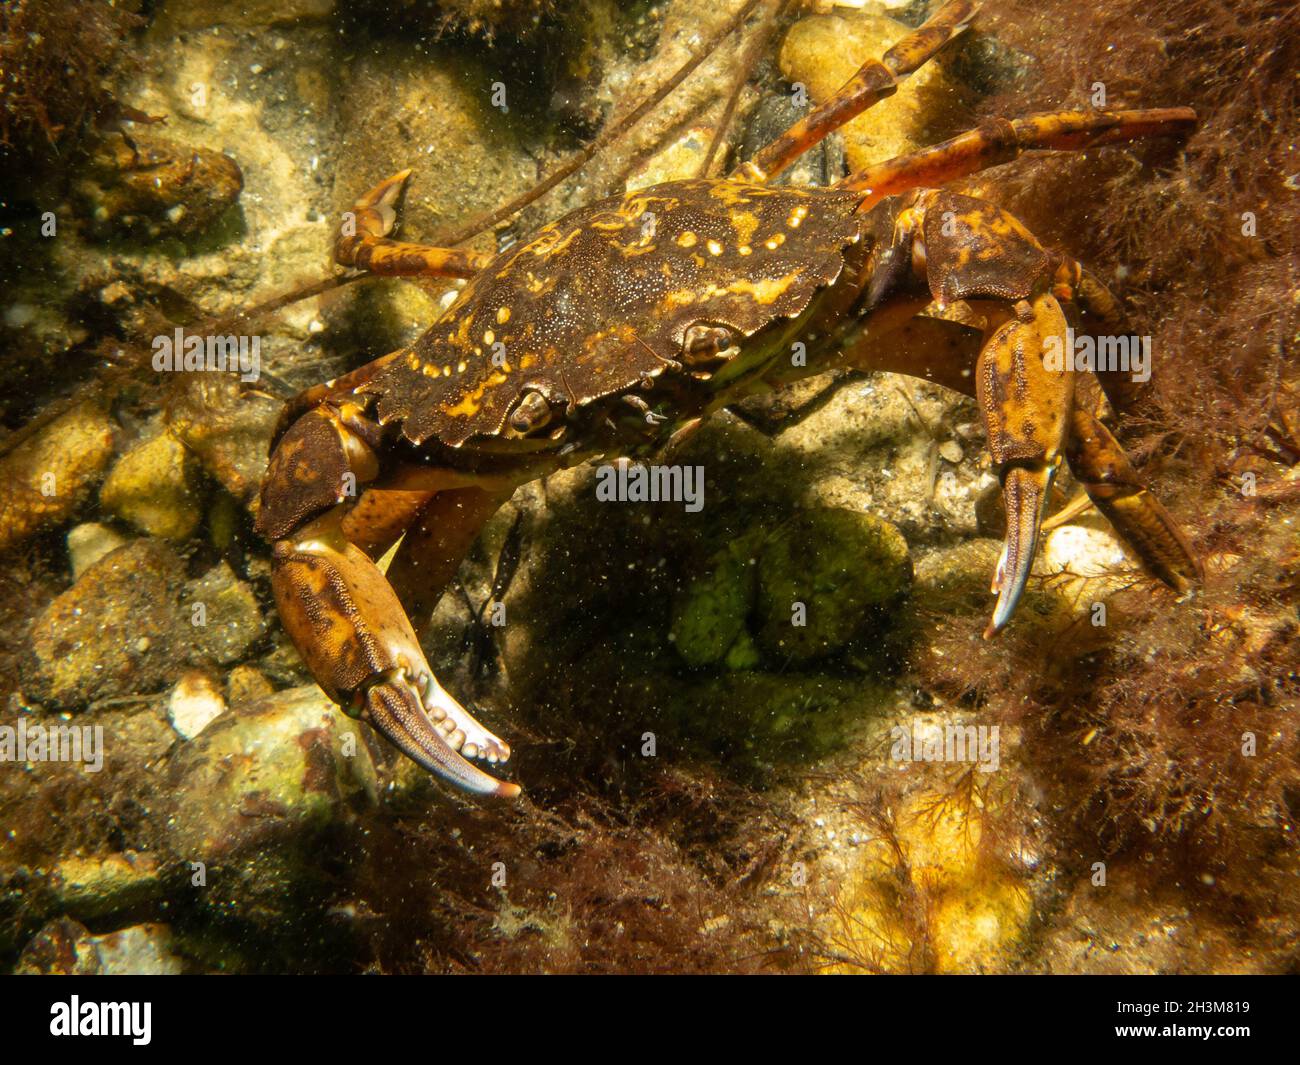 A close-up picture of a crab. Picture from The Sound, between Sweden and Denmark Stock Photo